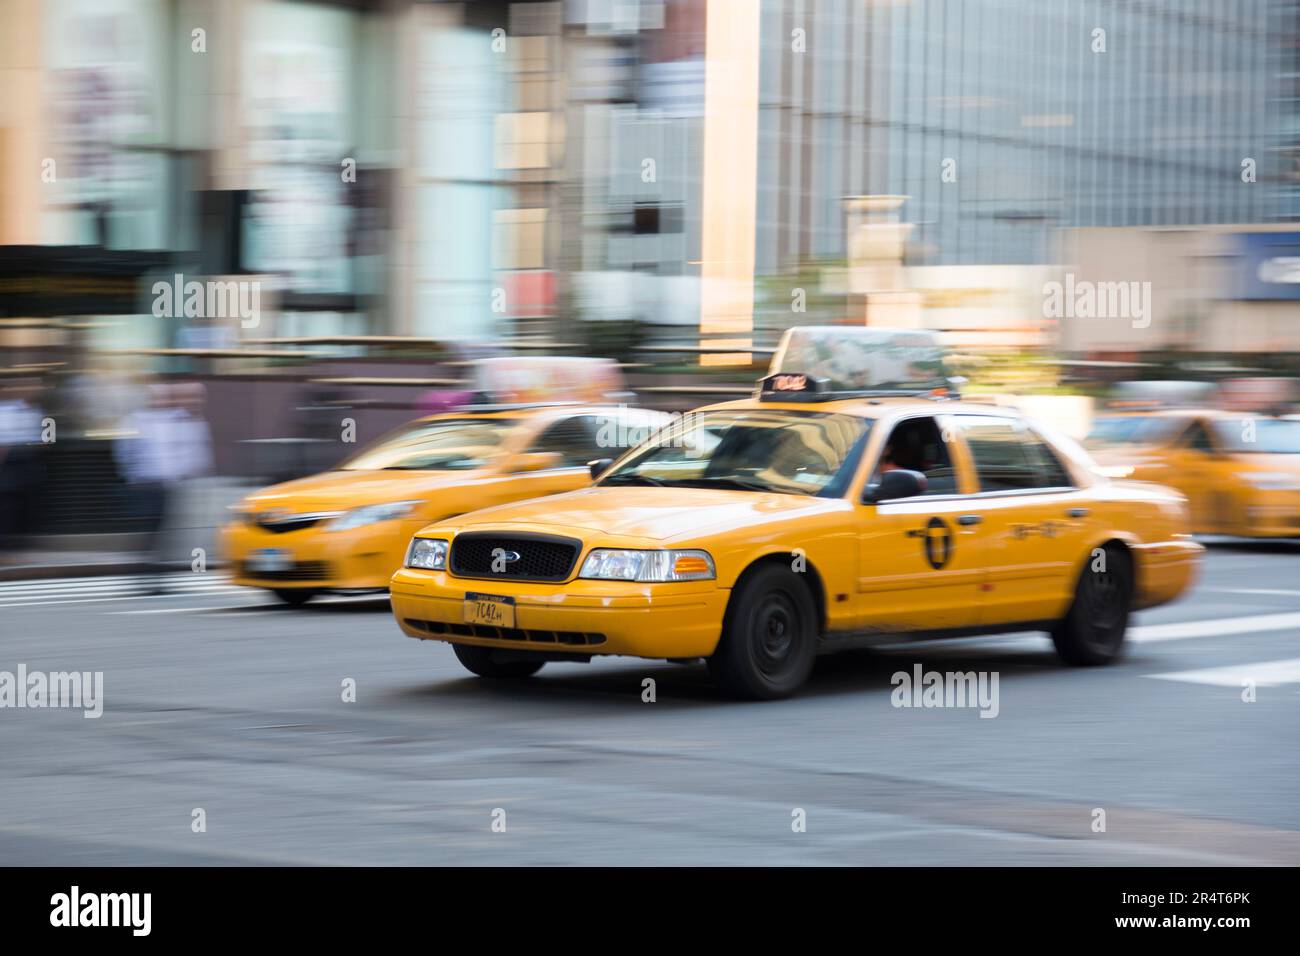 US, New York, Yellow taxi cabs along 7th avenue. Stock Photo